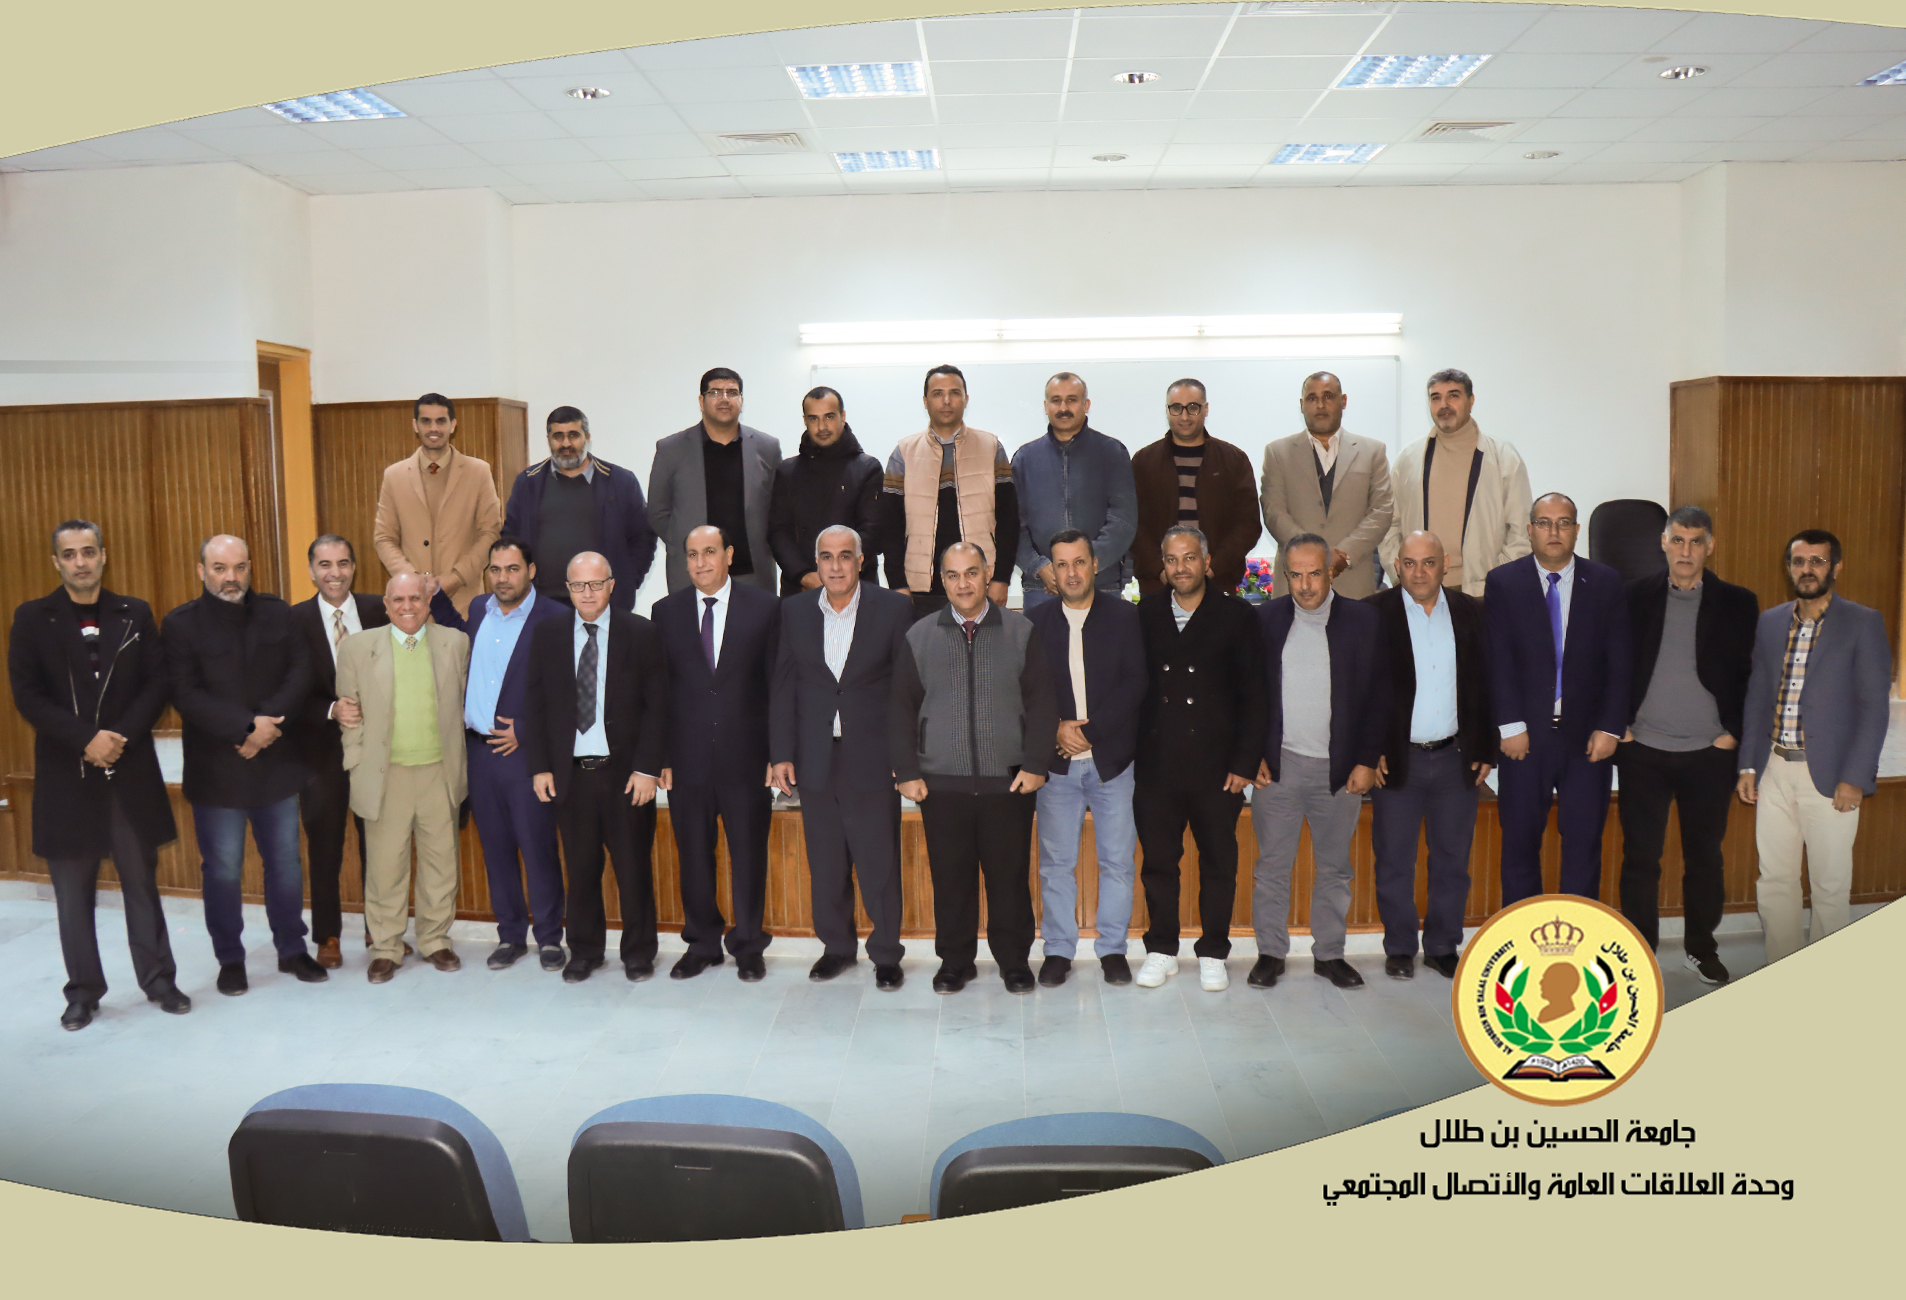 The president of the university meets the faculty of the Faculty of Science.